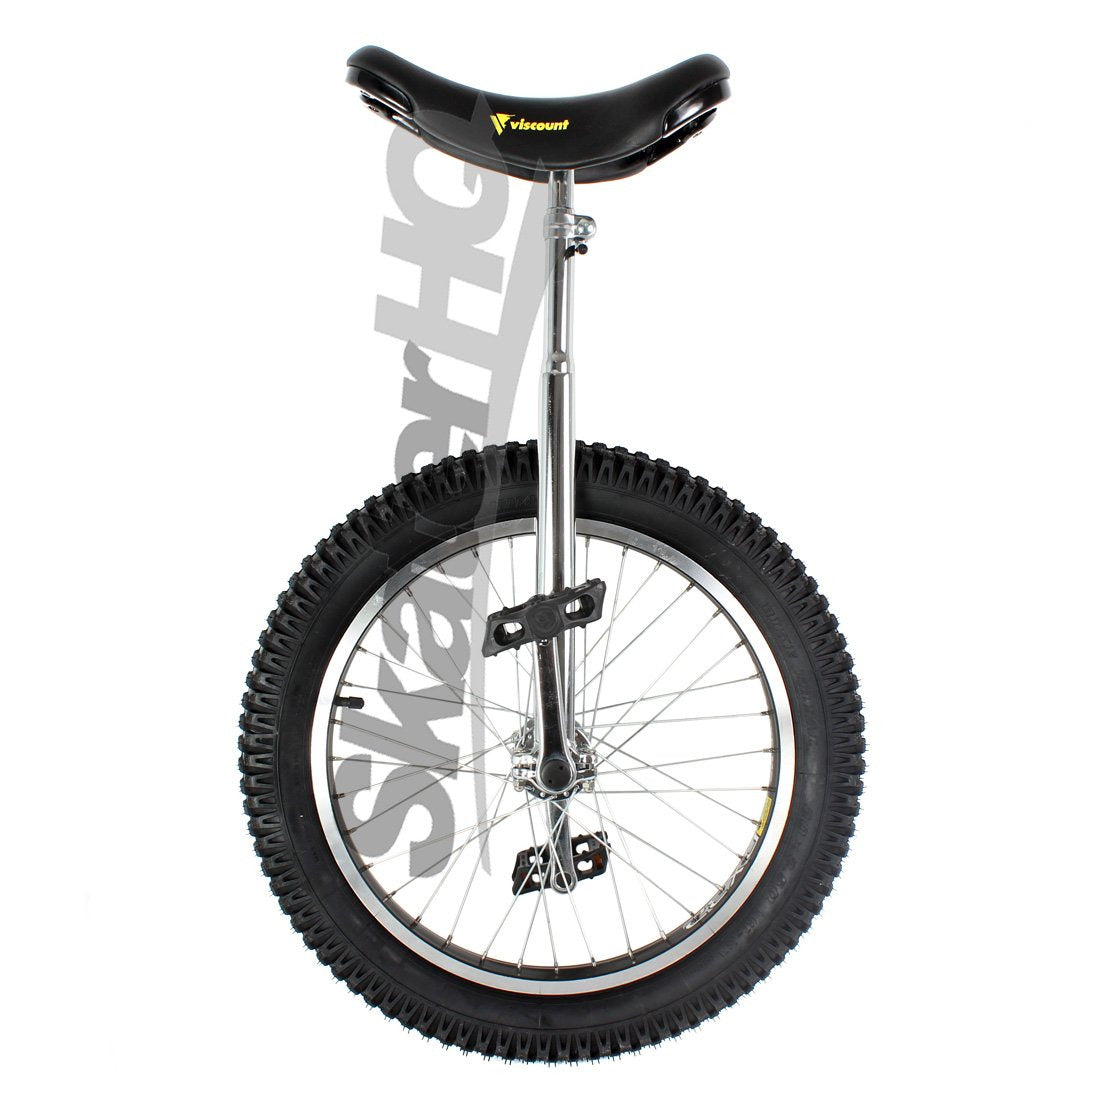 Viscount CP Trials 20inch Unicycle - Chrome Other Fun Toys